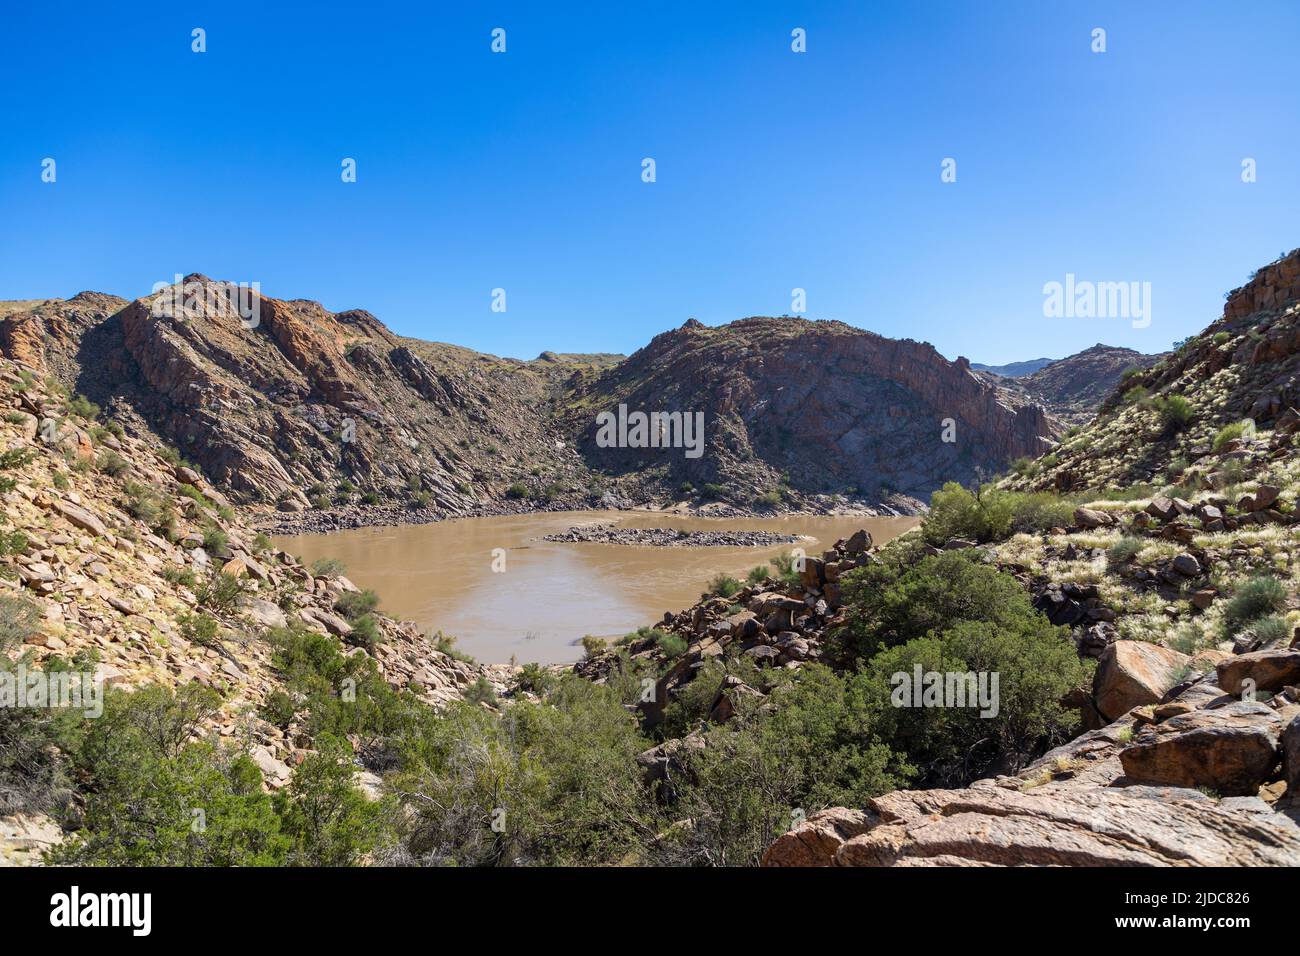 Area in the Augrabies National park called Echo corner. The brown water of the Orange river can be seen between the granite hills. Stock Photo